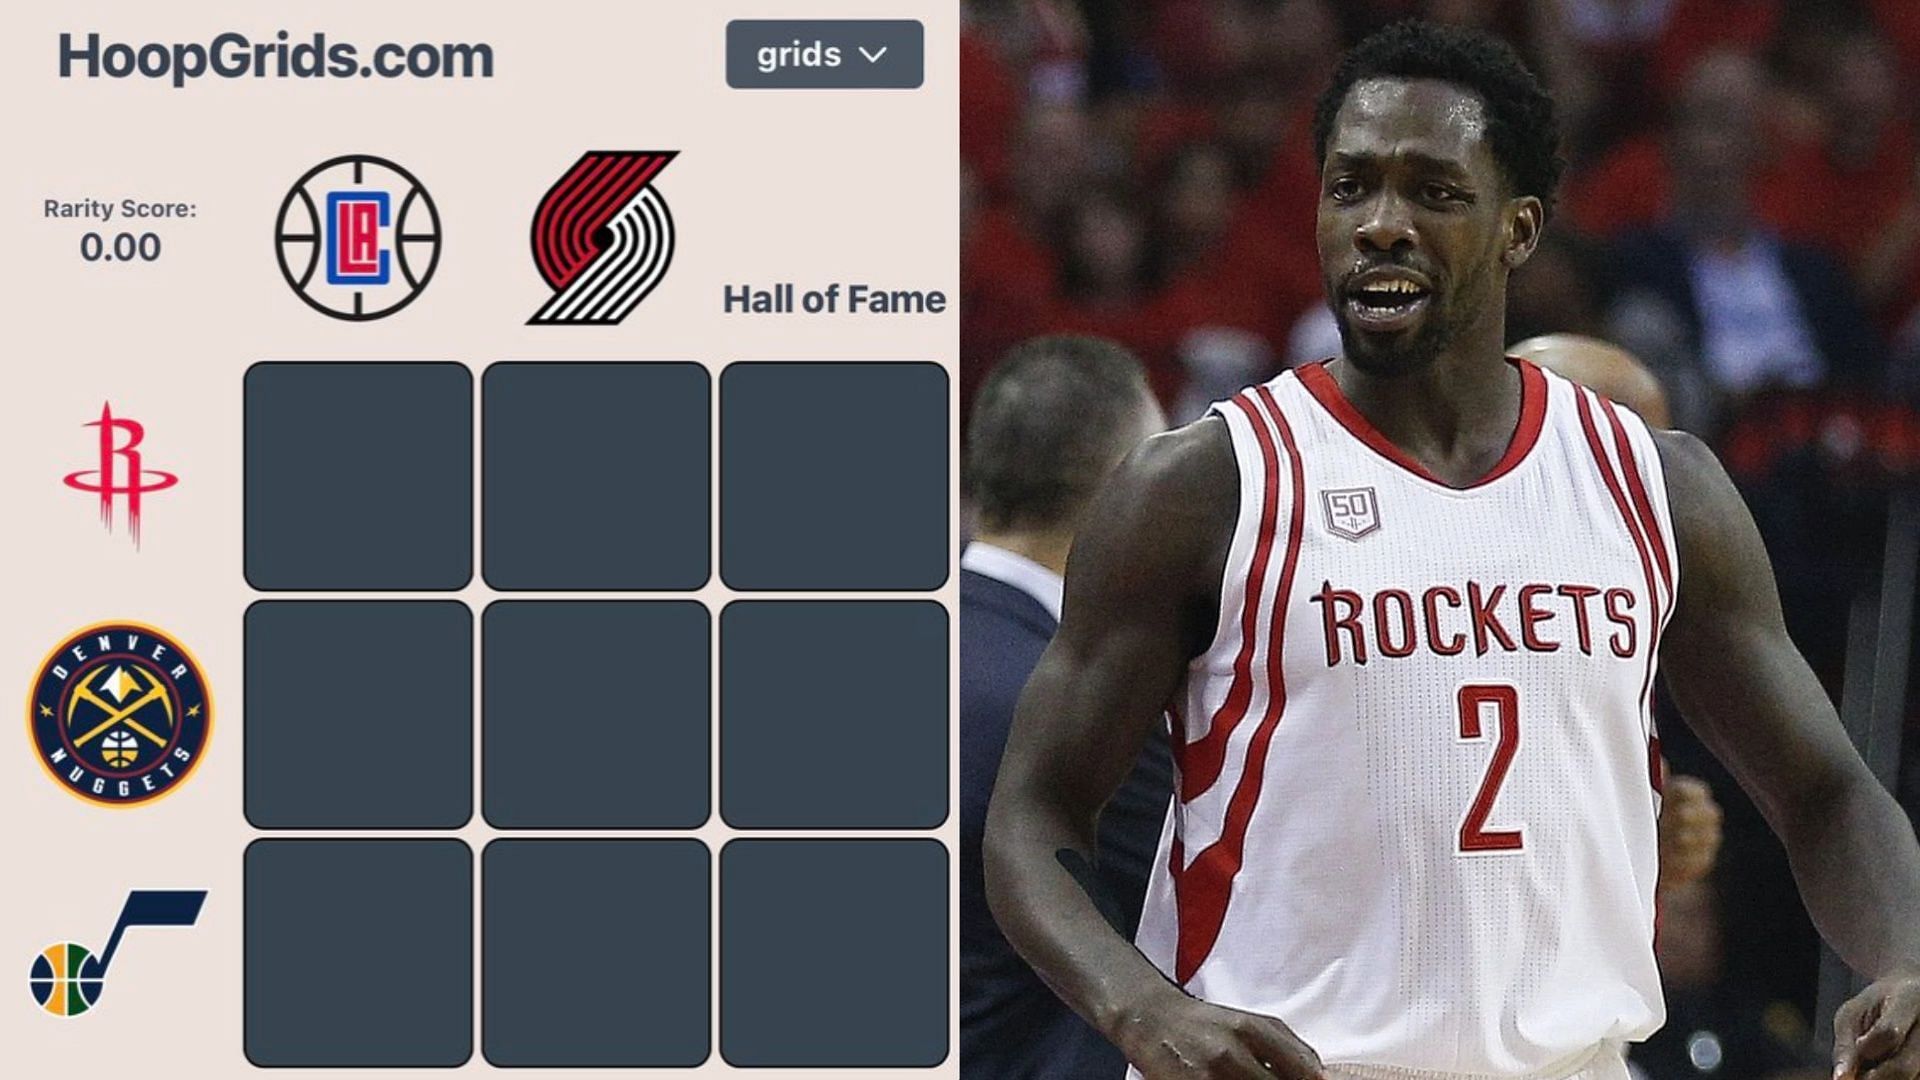 NBA HoopGrids (July 31) and Patrick Beverley